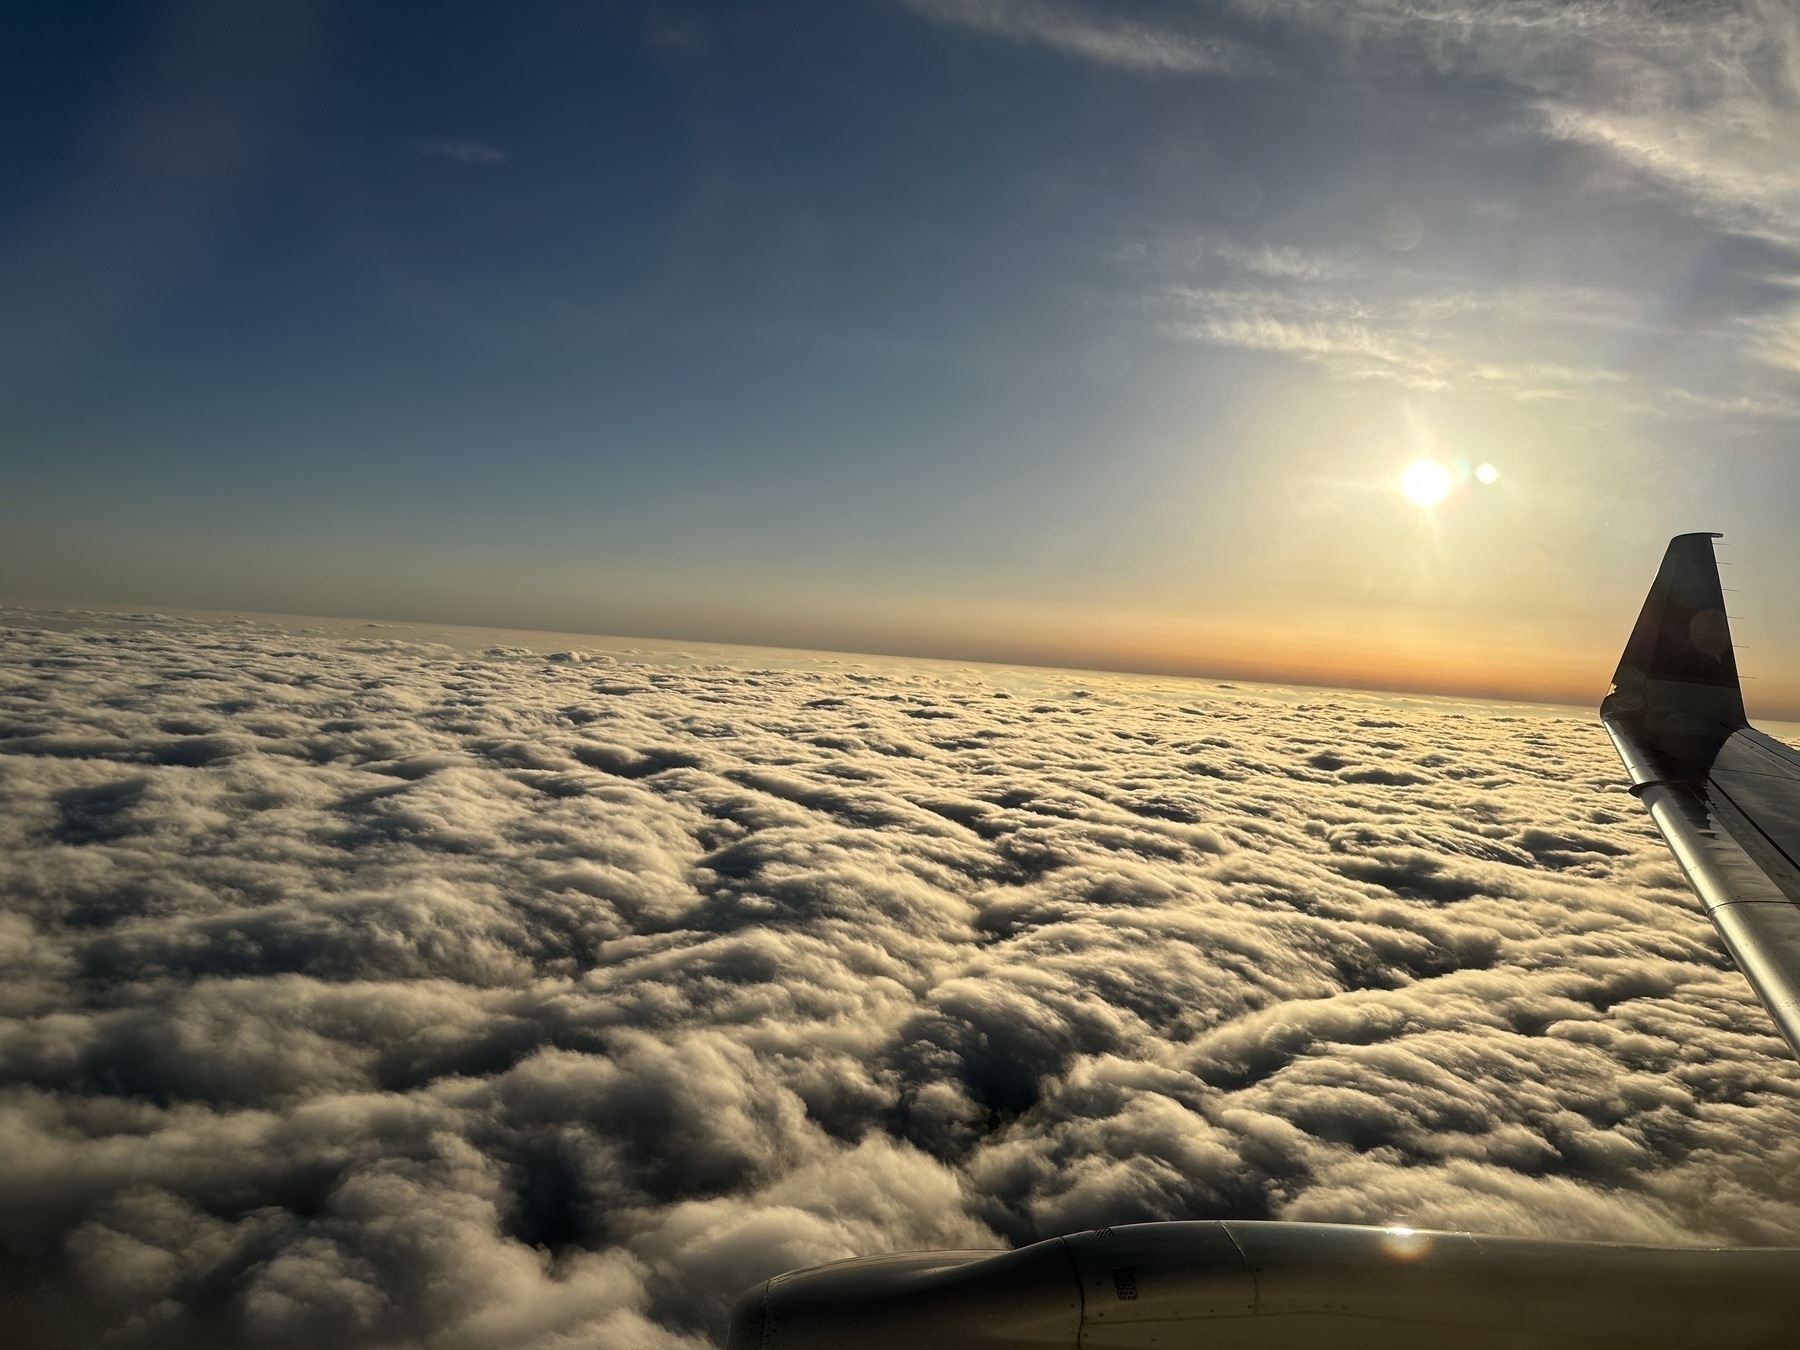 Just above the clouds in a tiny plane.